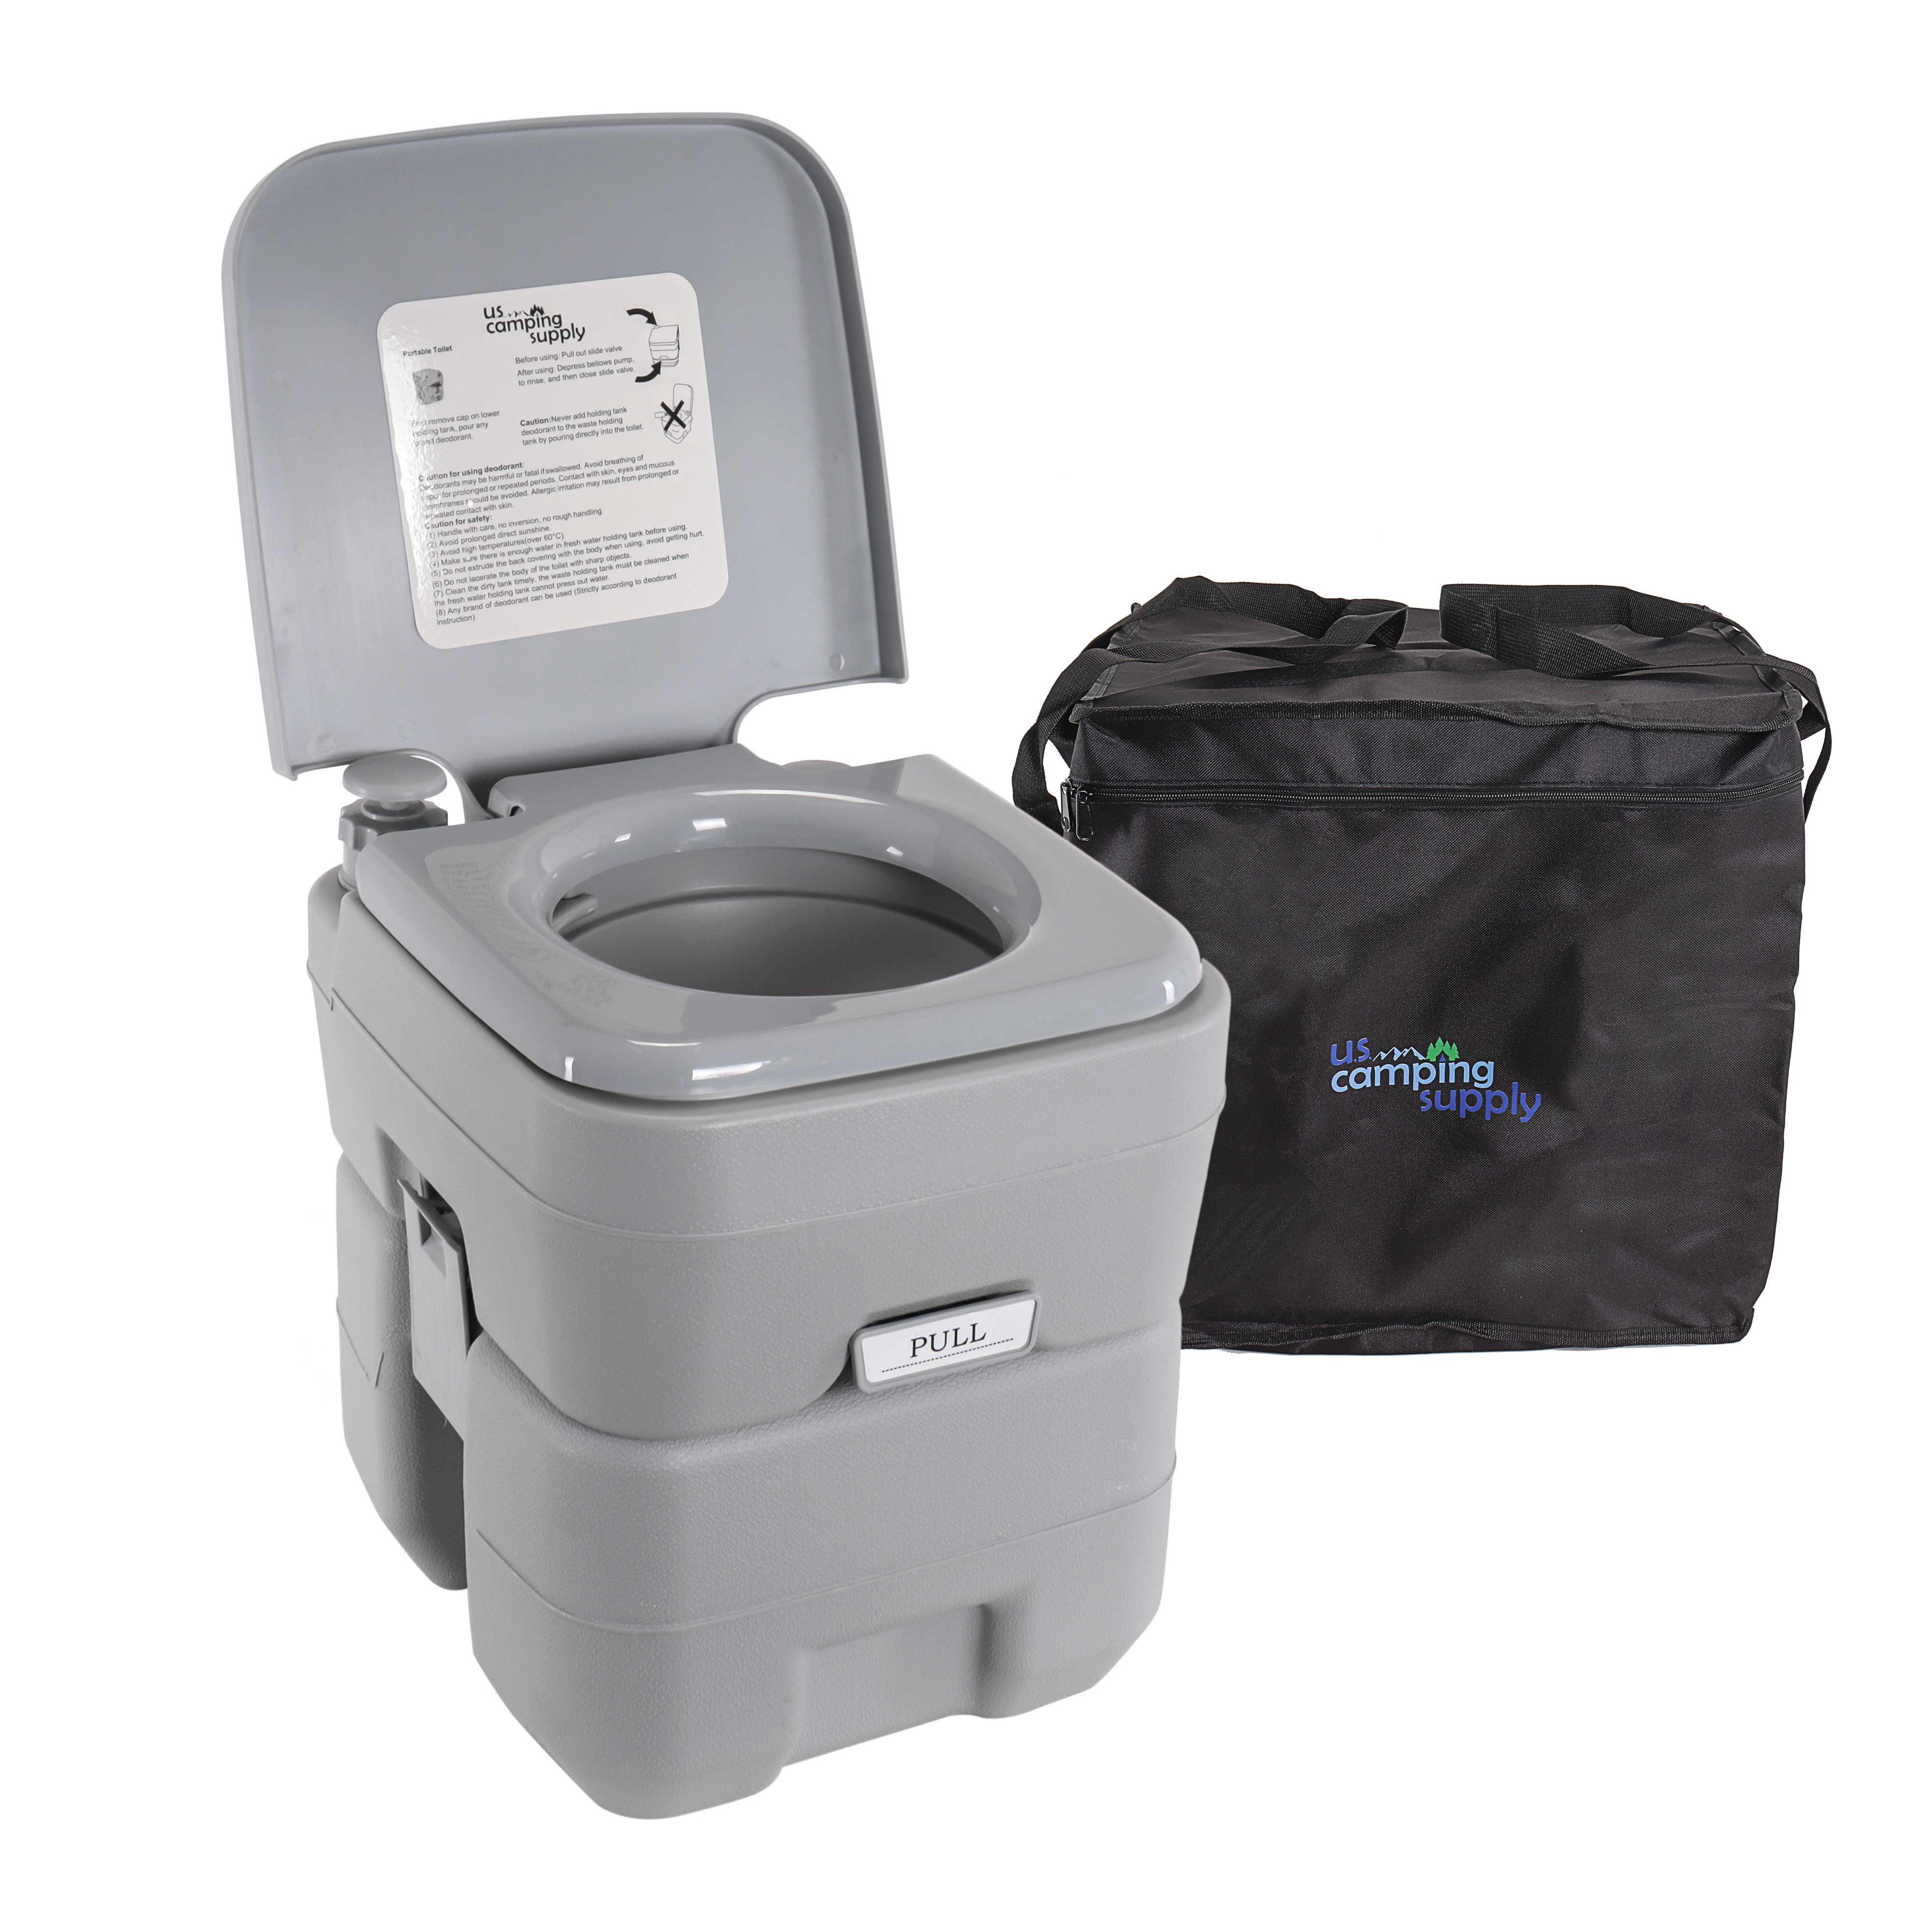 In dienst nemen bloemblad passend U.S. Camping Supply Portable Toilet with Carry Bag, 5.3 Gallon Waste Tank -  Compact Indoor Outdoor Dual Outlet Commode - Travel, Camping, RV, Boating,  Fishing - Traveling Bathroom, Water Flush Pump - Walmart.com